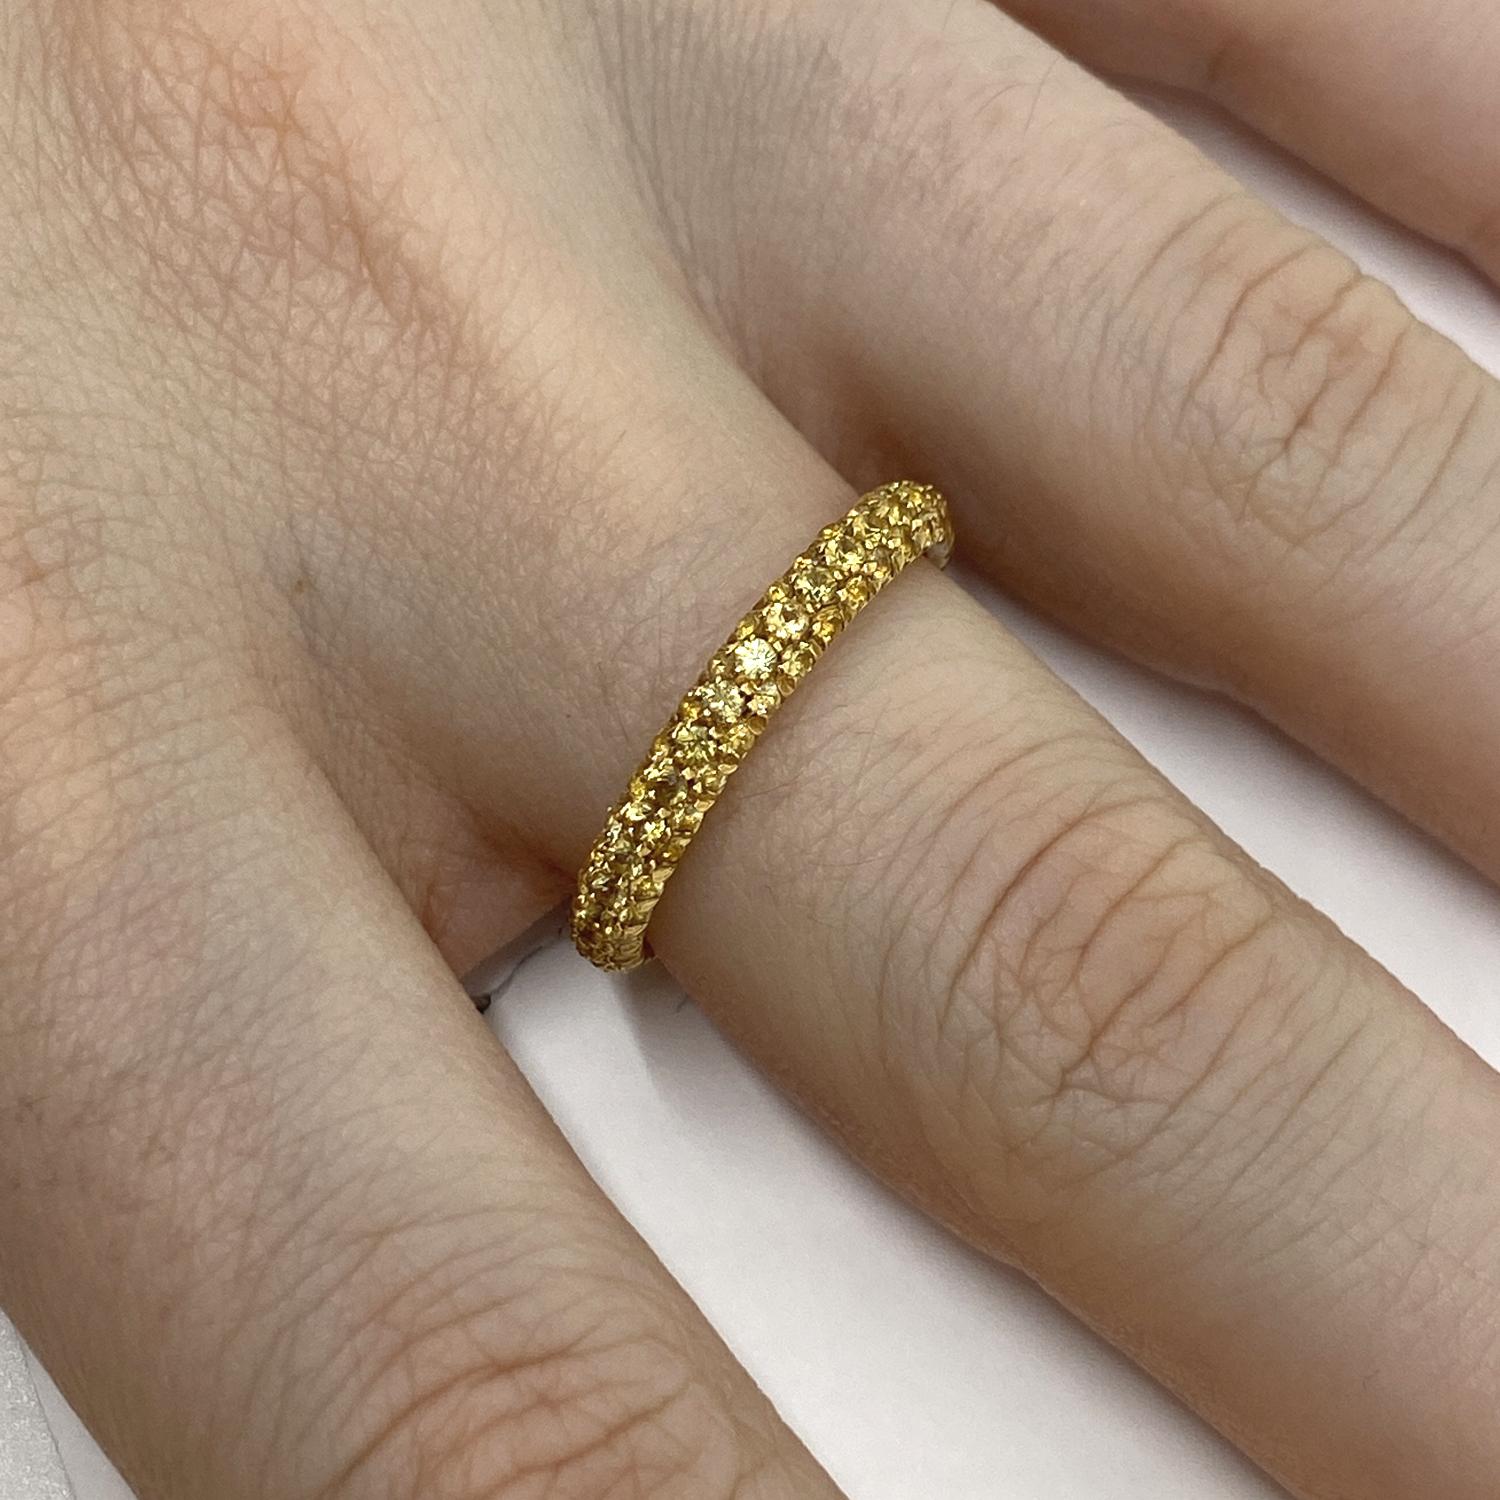 Ring made of 18kt yellow gold with brilliant-cut yellow sapphires for ct.1.54 

Welcome to our jewelry collection, where every piece tells a story of timeless elegance and unparalleled craftsmanship. As a family-run business in Italy for over 100